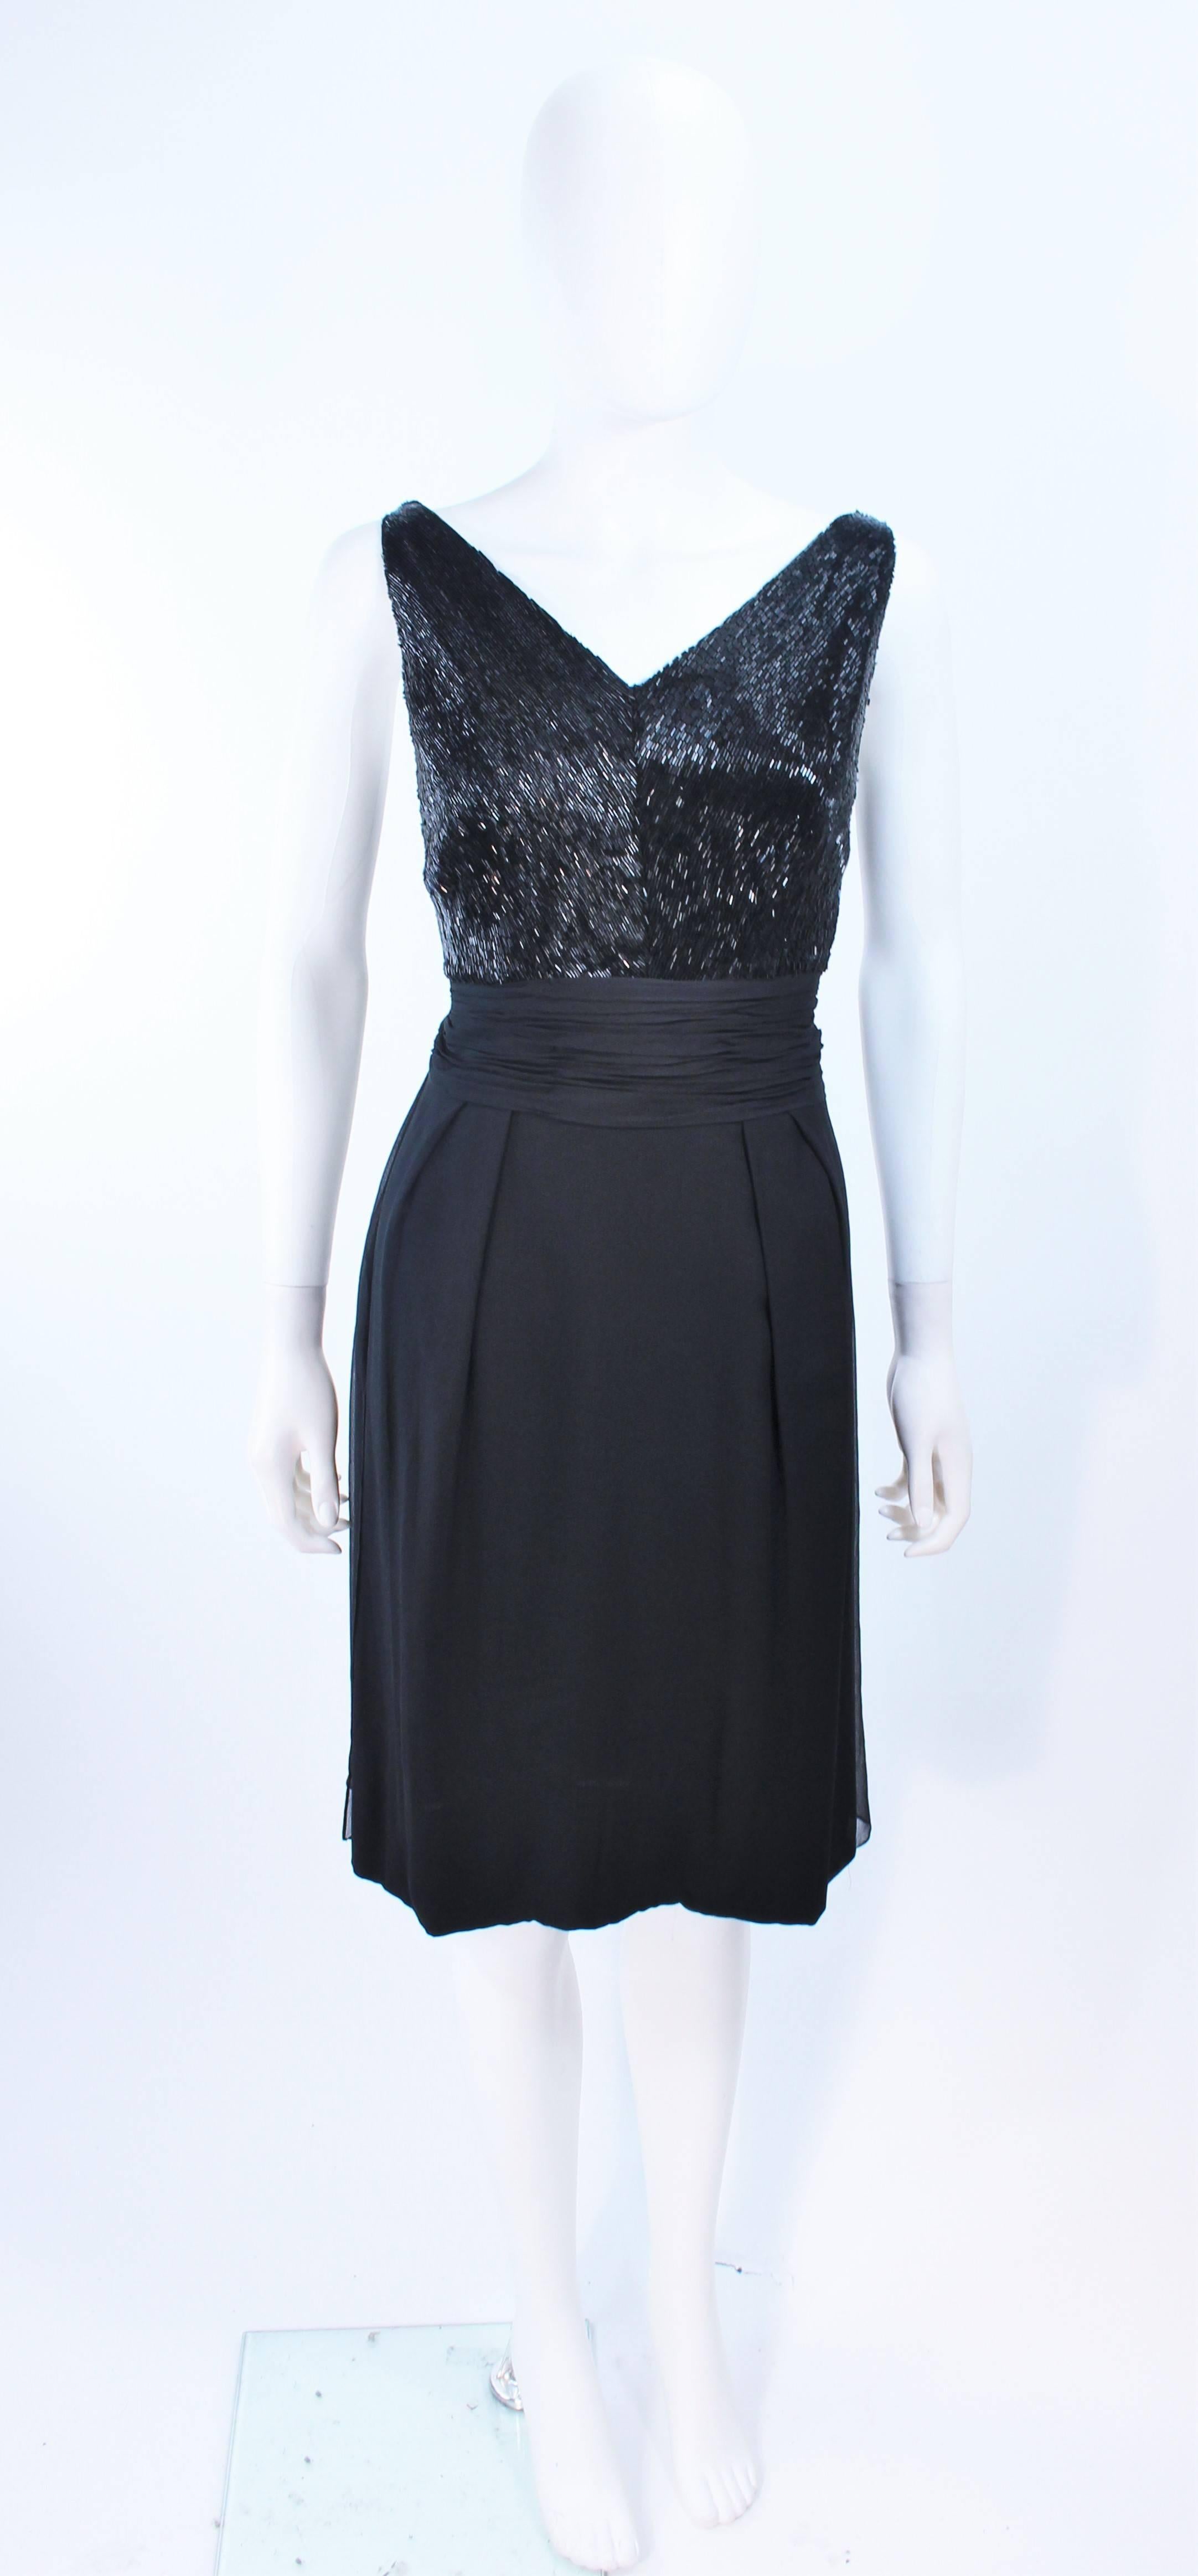 This cocktail dress is composed of a black silk chiffon. Features a beaded bust detail with gathered waist. There is a center back zipper closure. In excellent vintage condition.

**Please cross-reference measurements for personal accuracy. Size